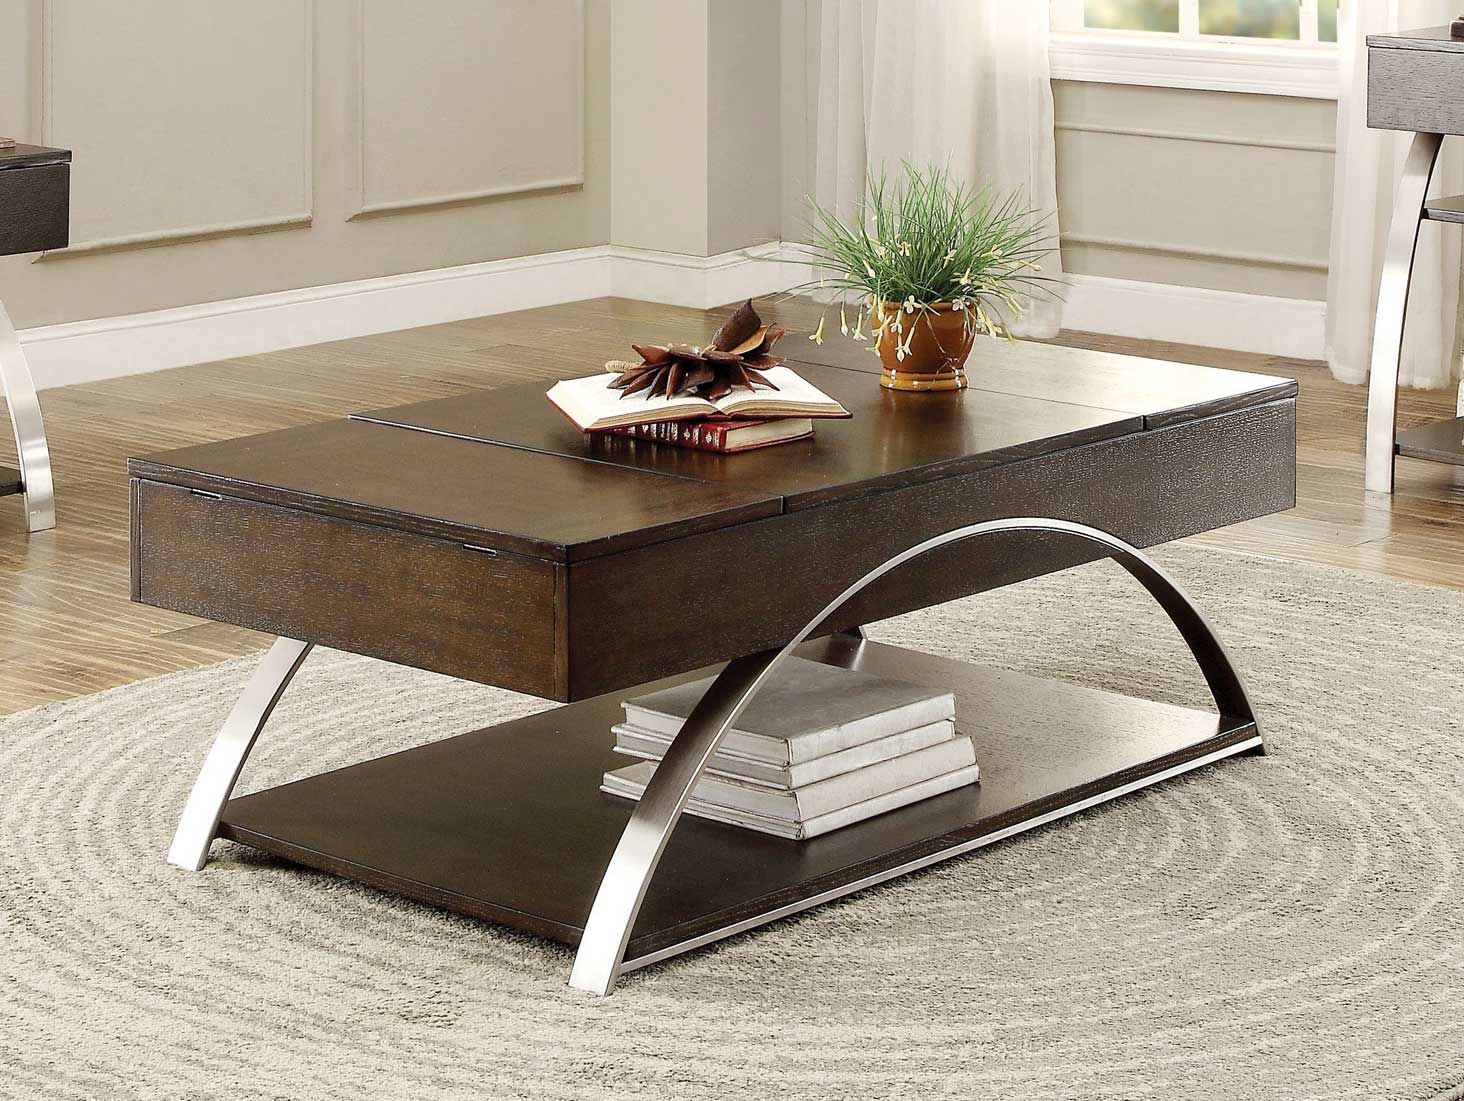 Homelegance Tioga Cocktail Table with Lift Top and Storage - Espresso